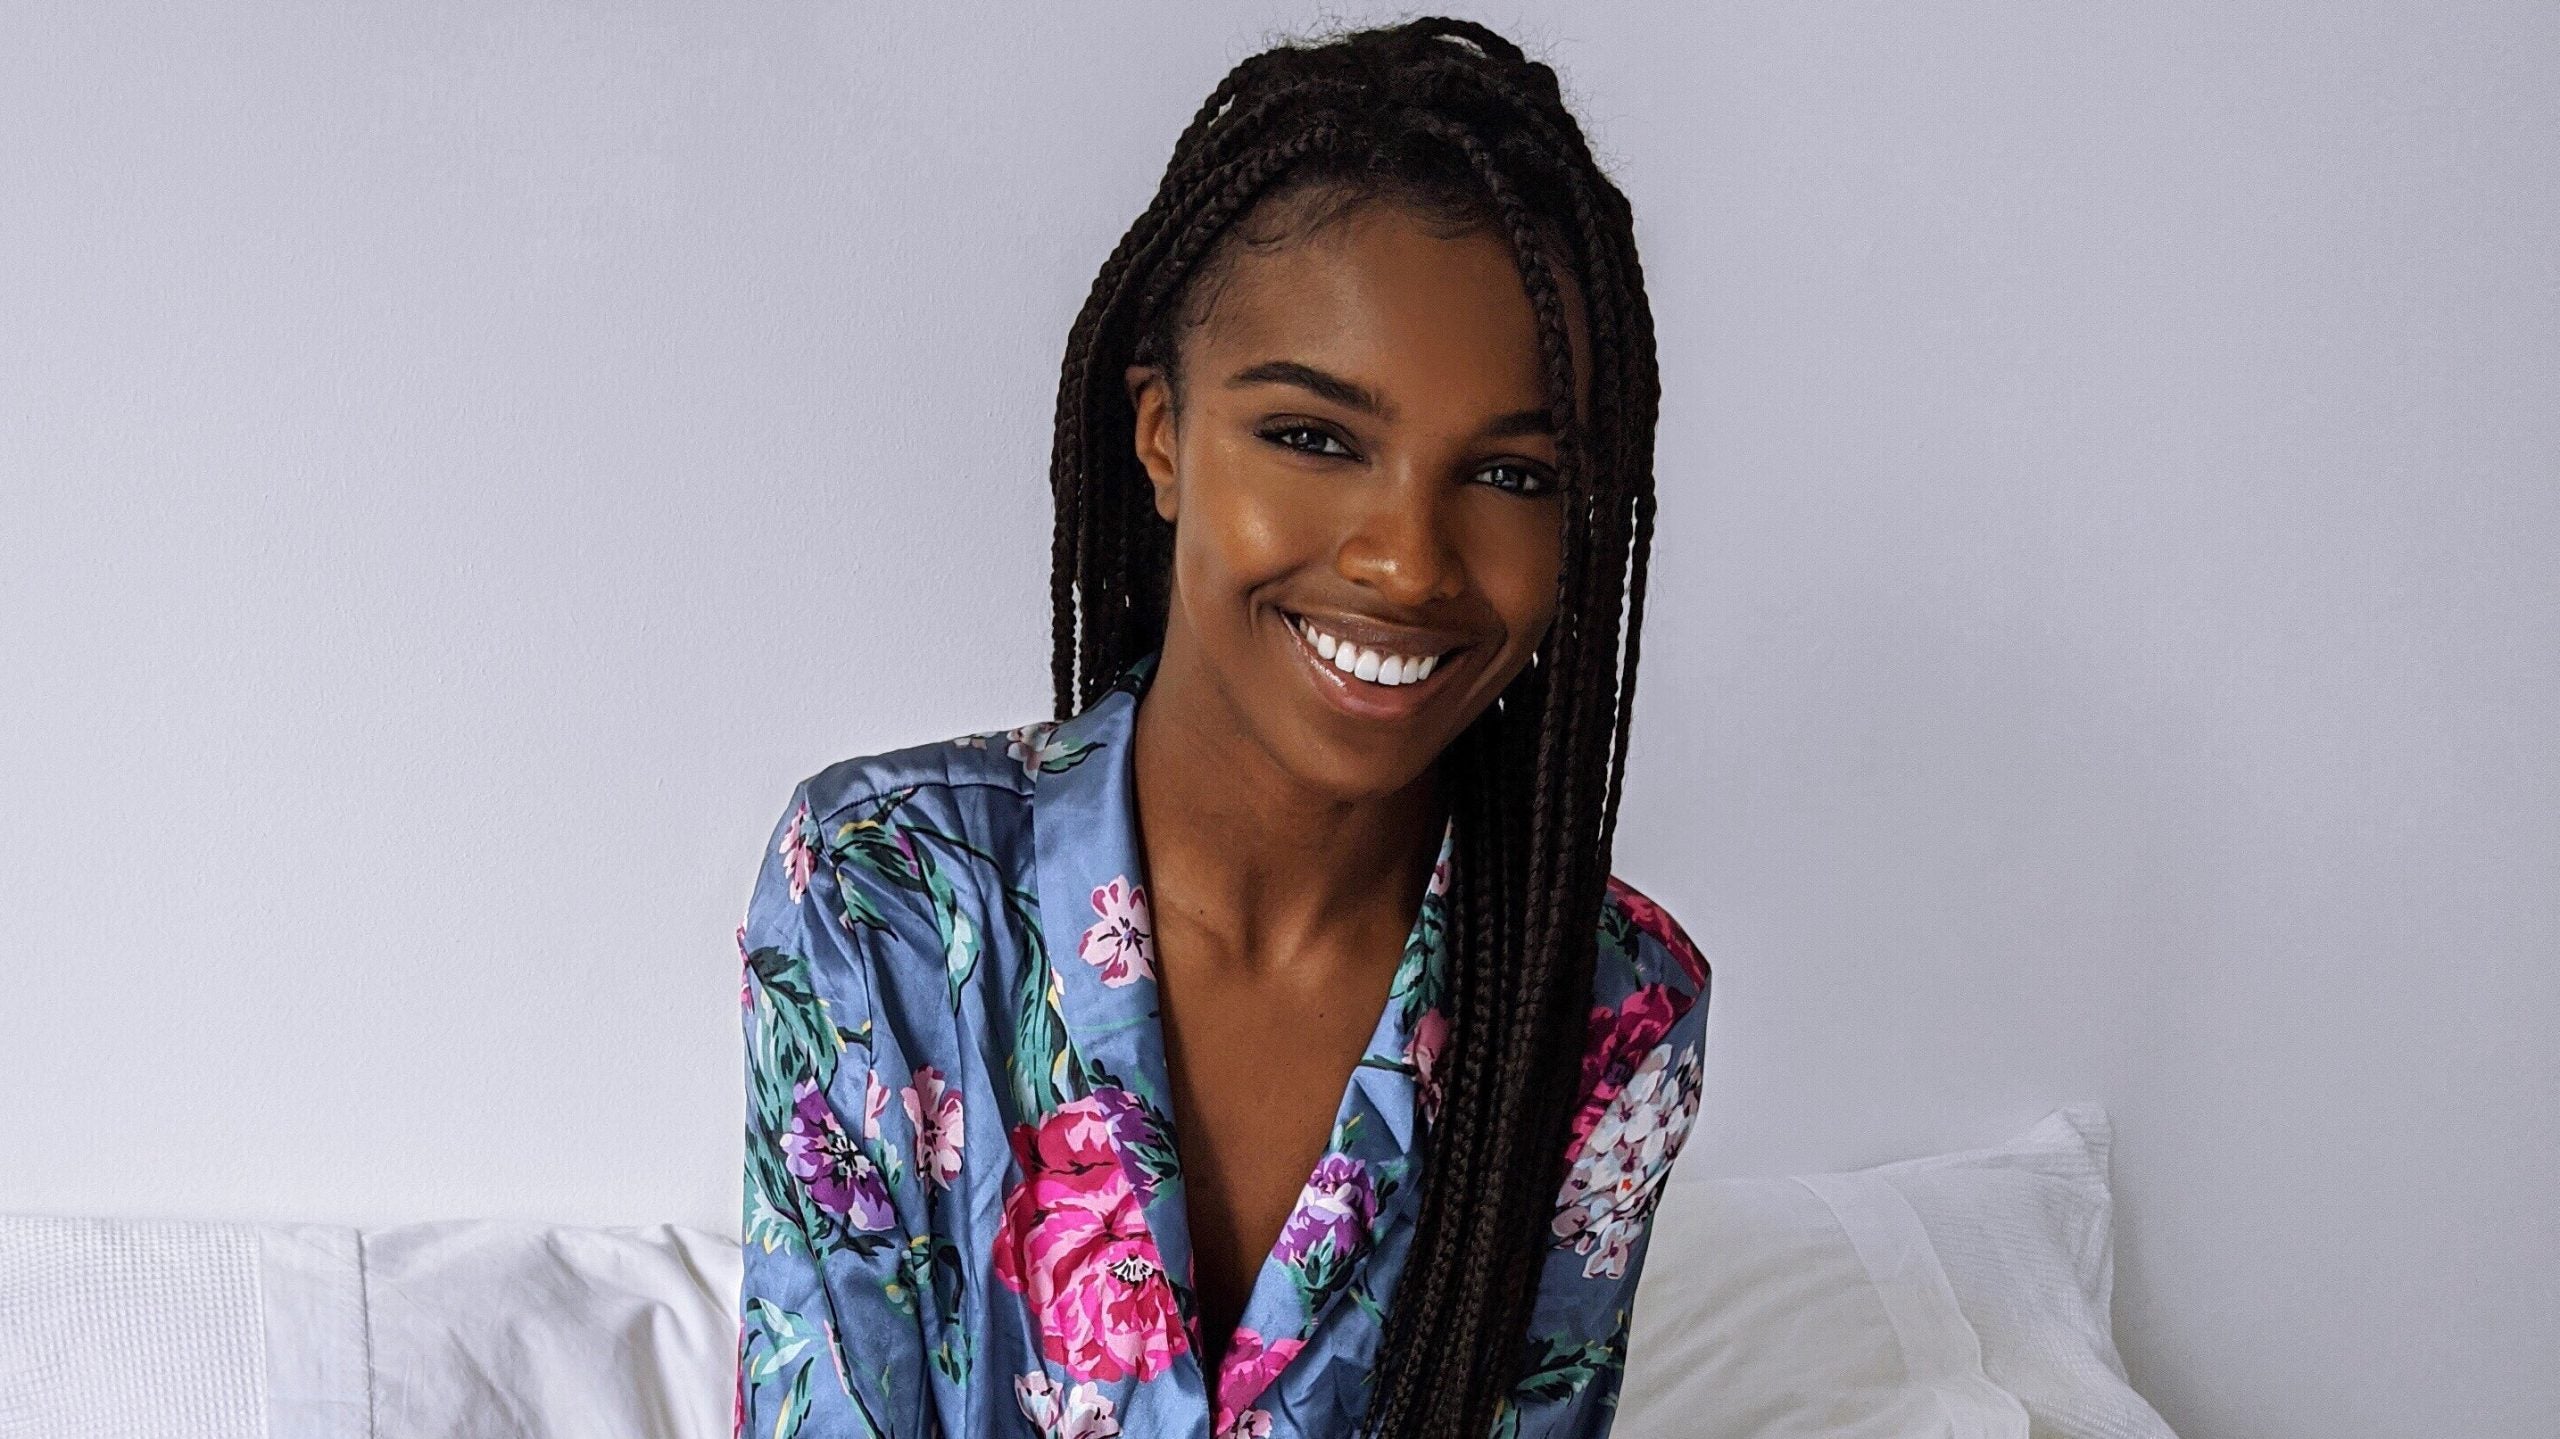 Victoria's Secret Model Leomie Anderson Chats With ESSENCE Girls United On Instagram Live